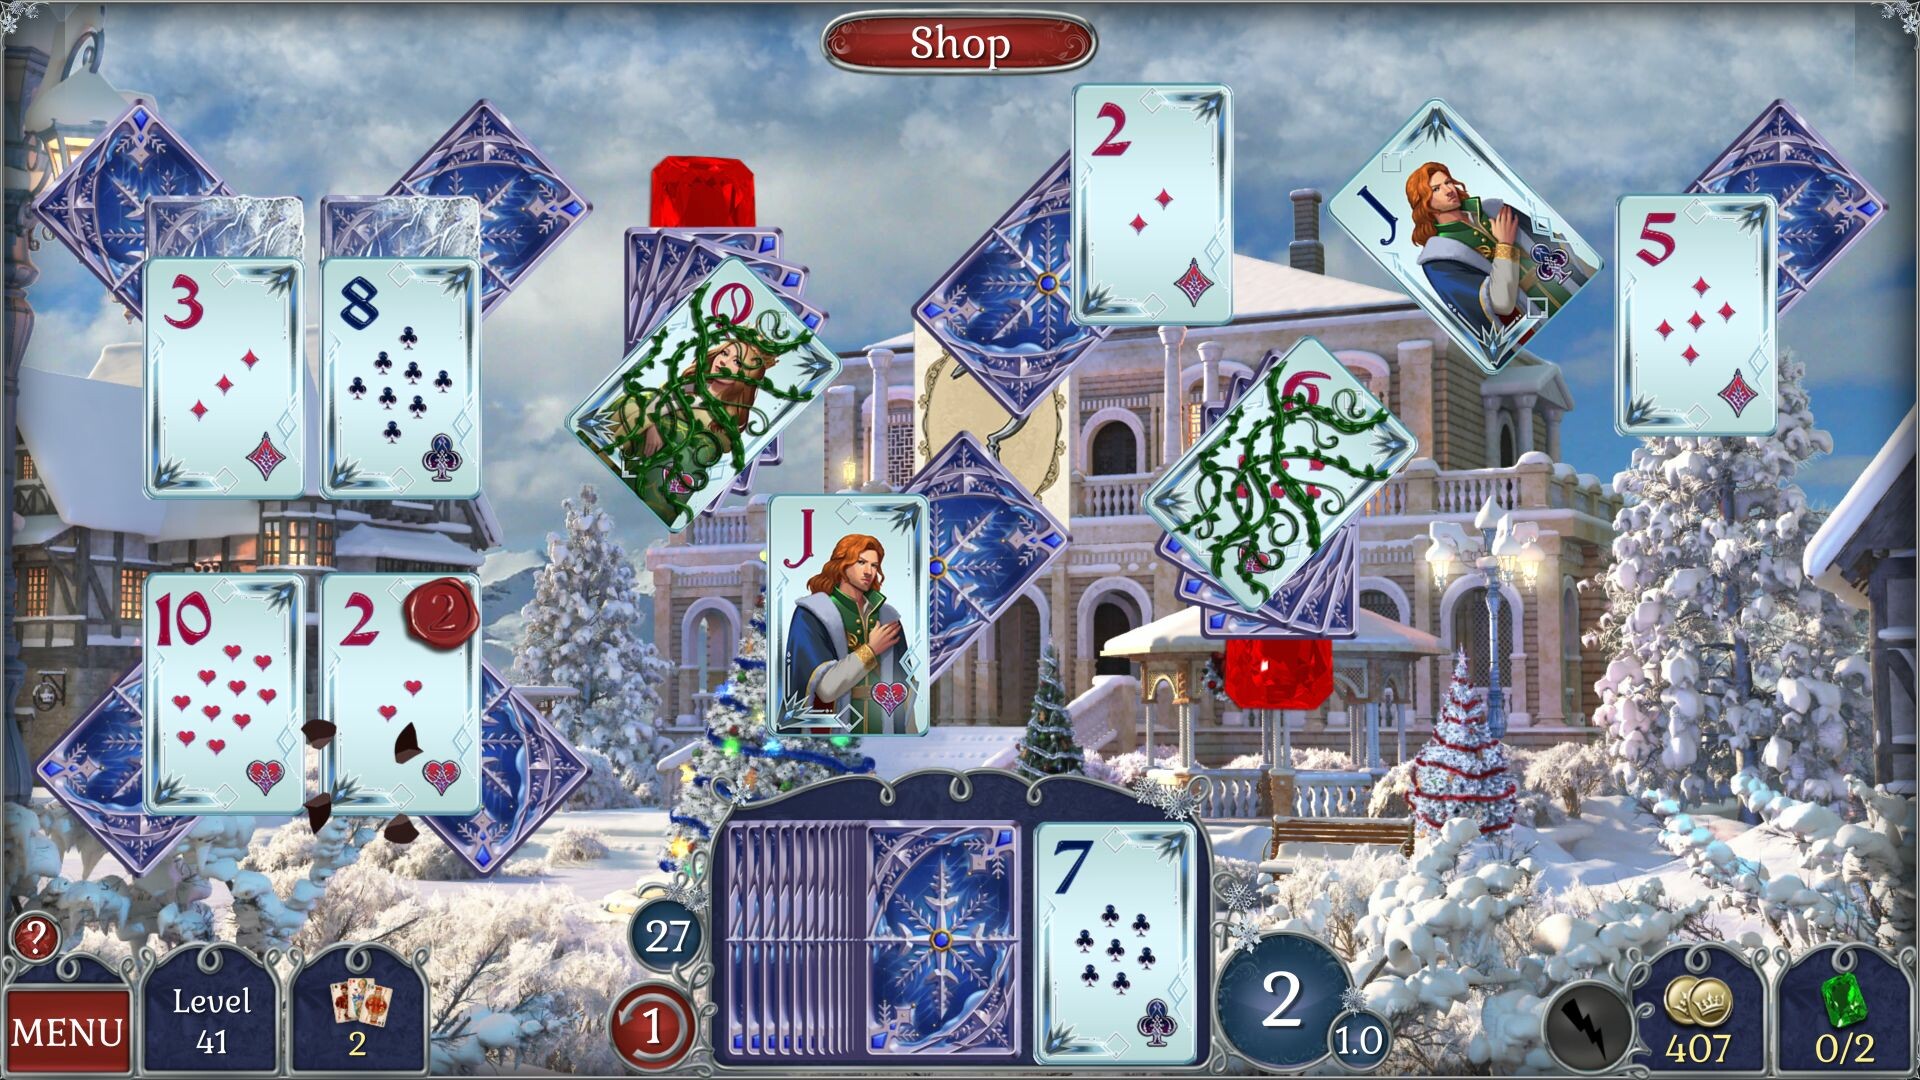 Jewel Match Solitaire Winterscapes 2 - Collector's Edition στο Steam